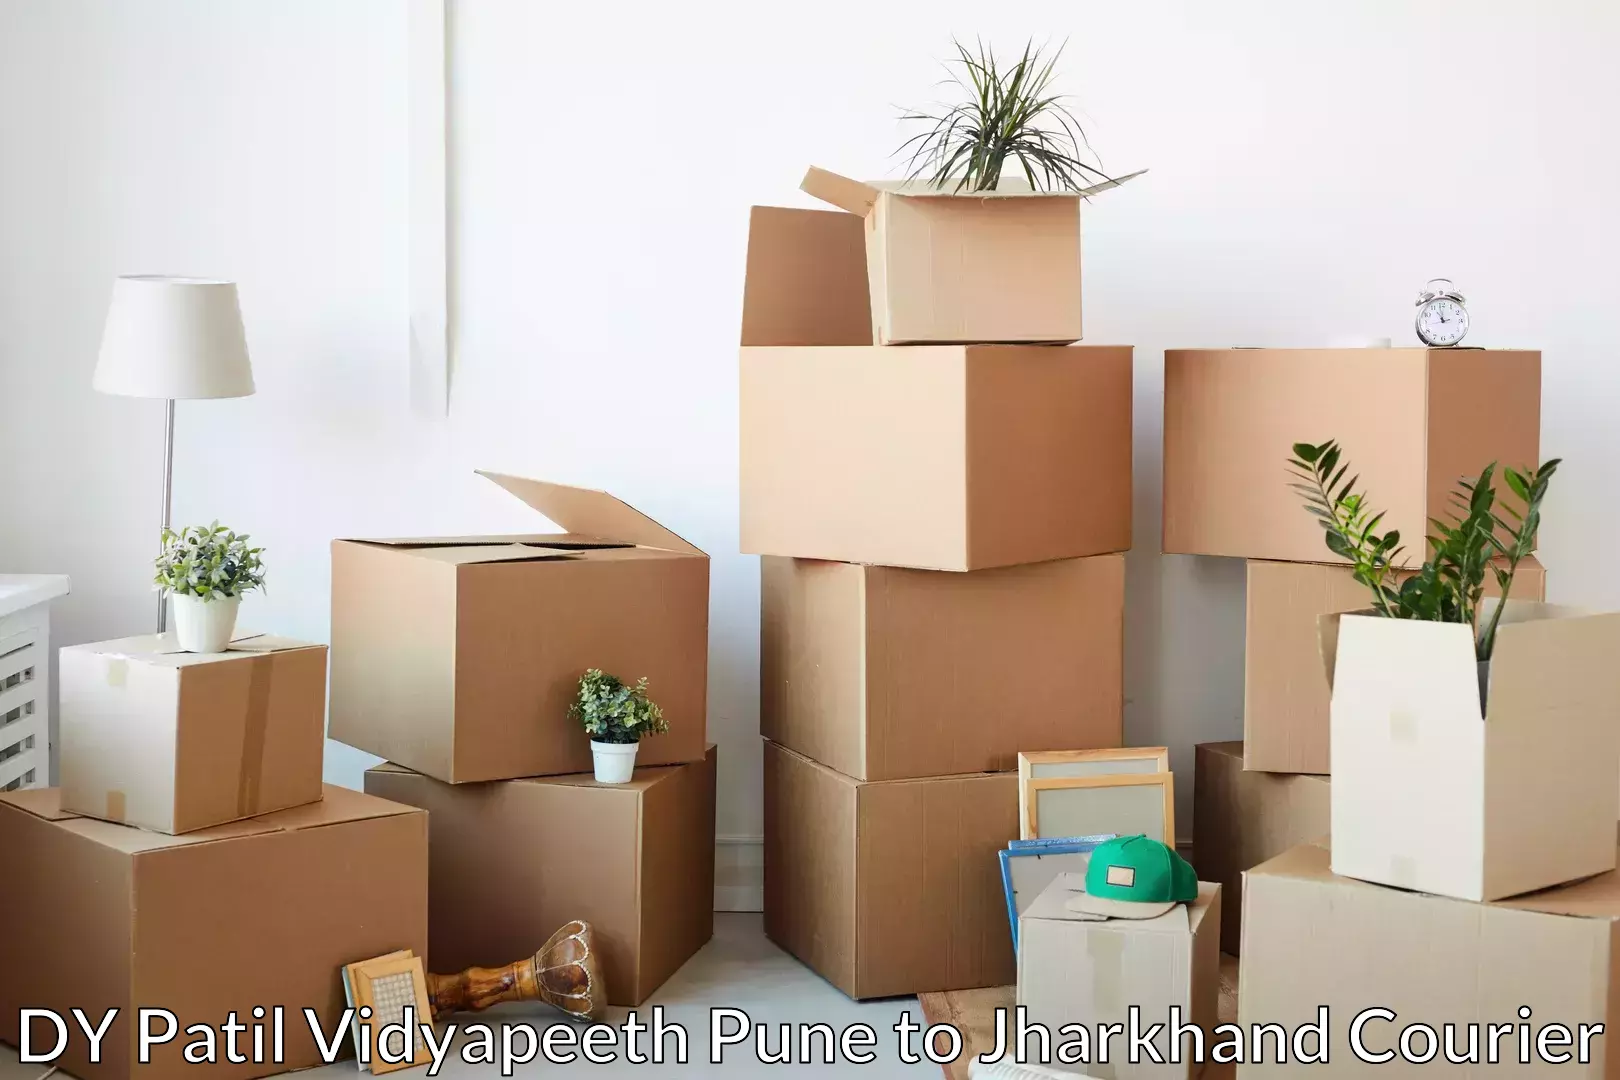 Home moving service DY Patil Vidyapeeth Pune to Mahagama